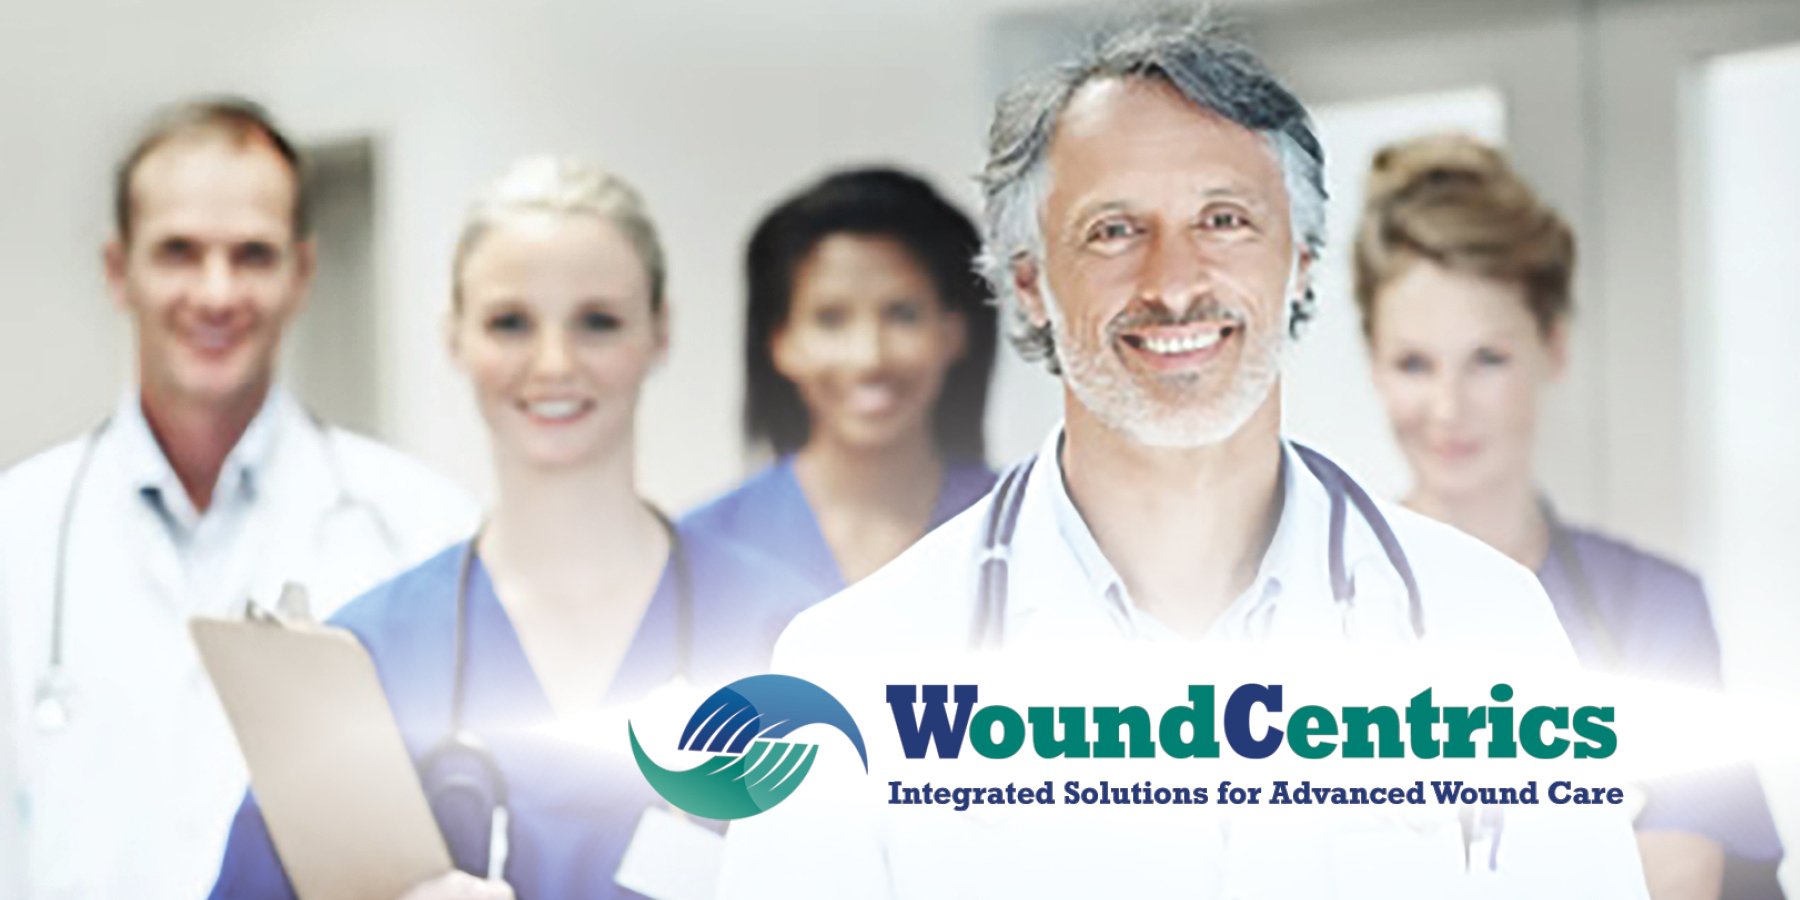 WoundCentrics Home Wound Care.jpg